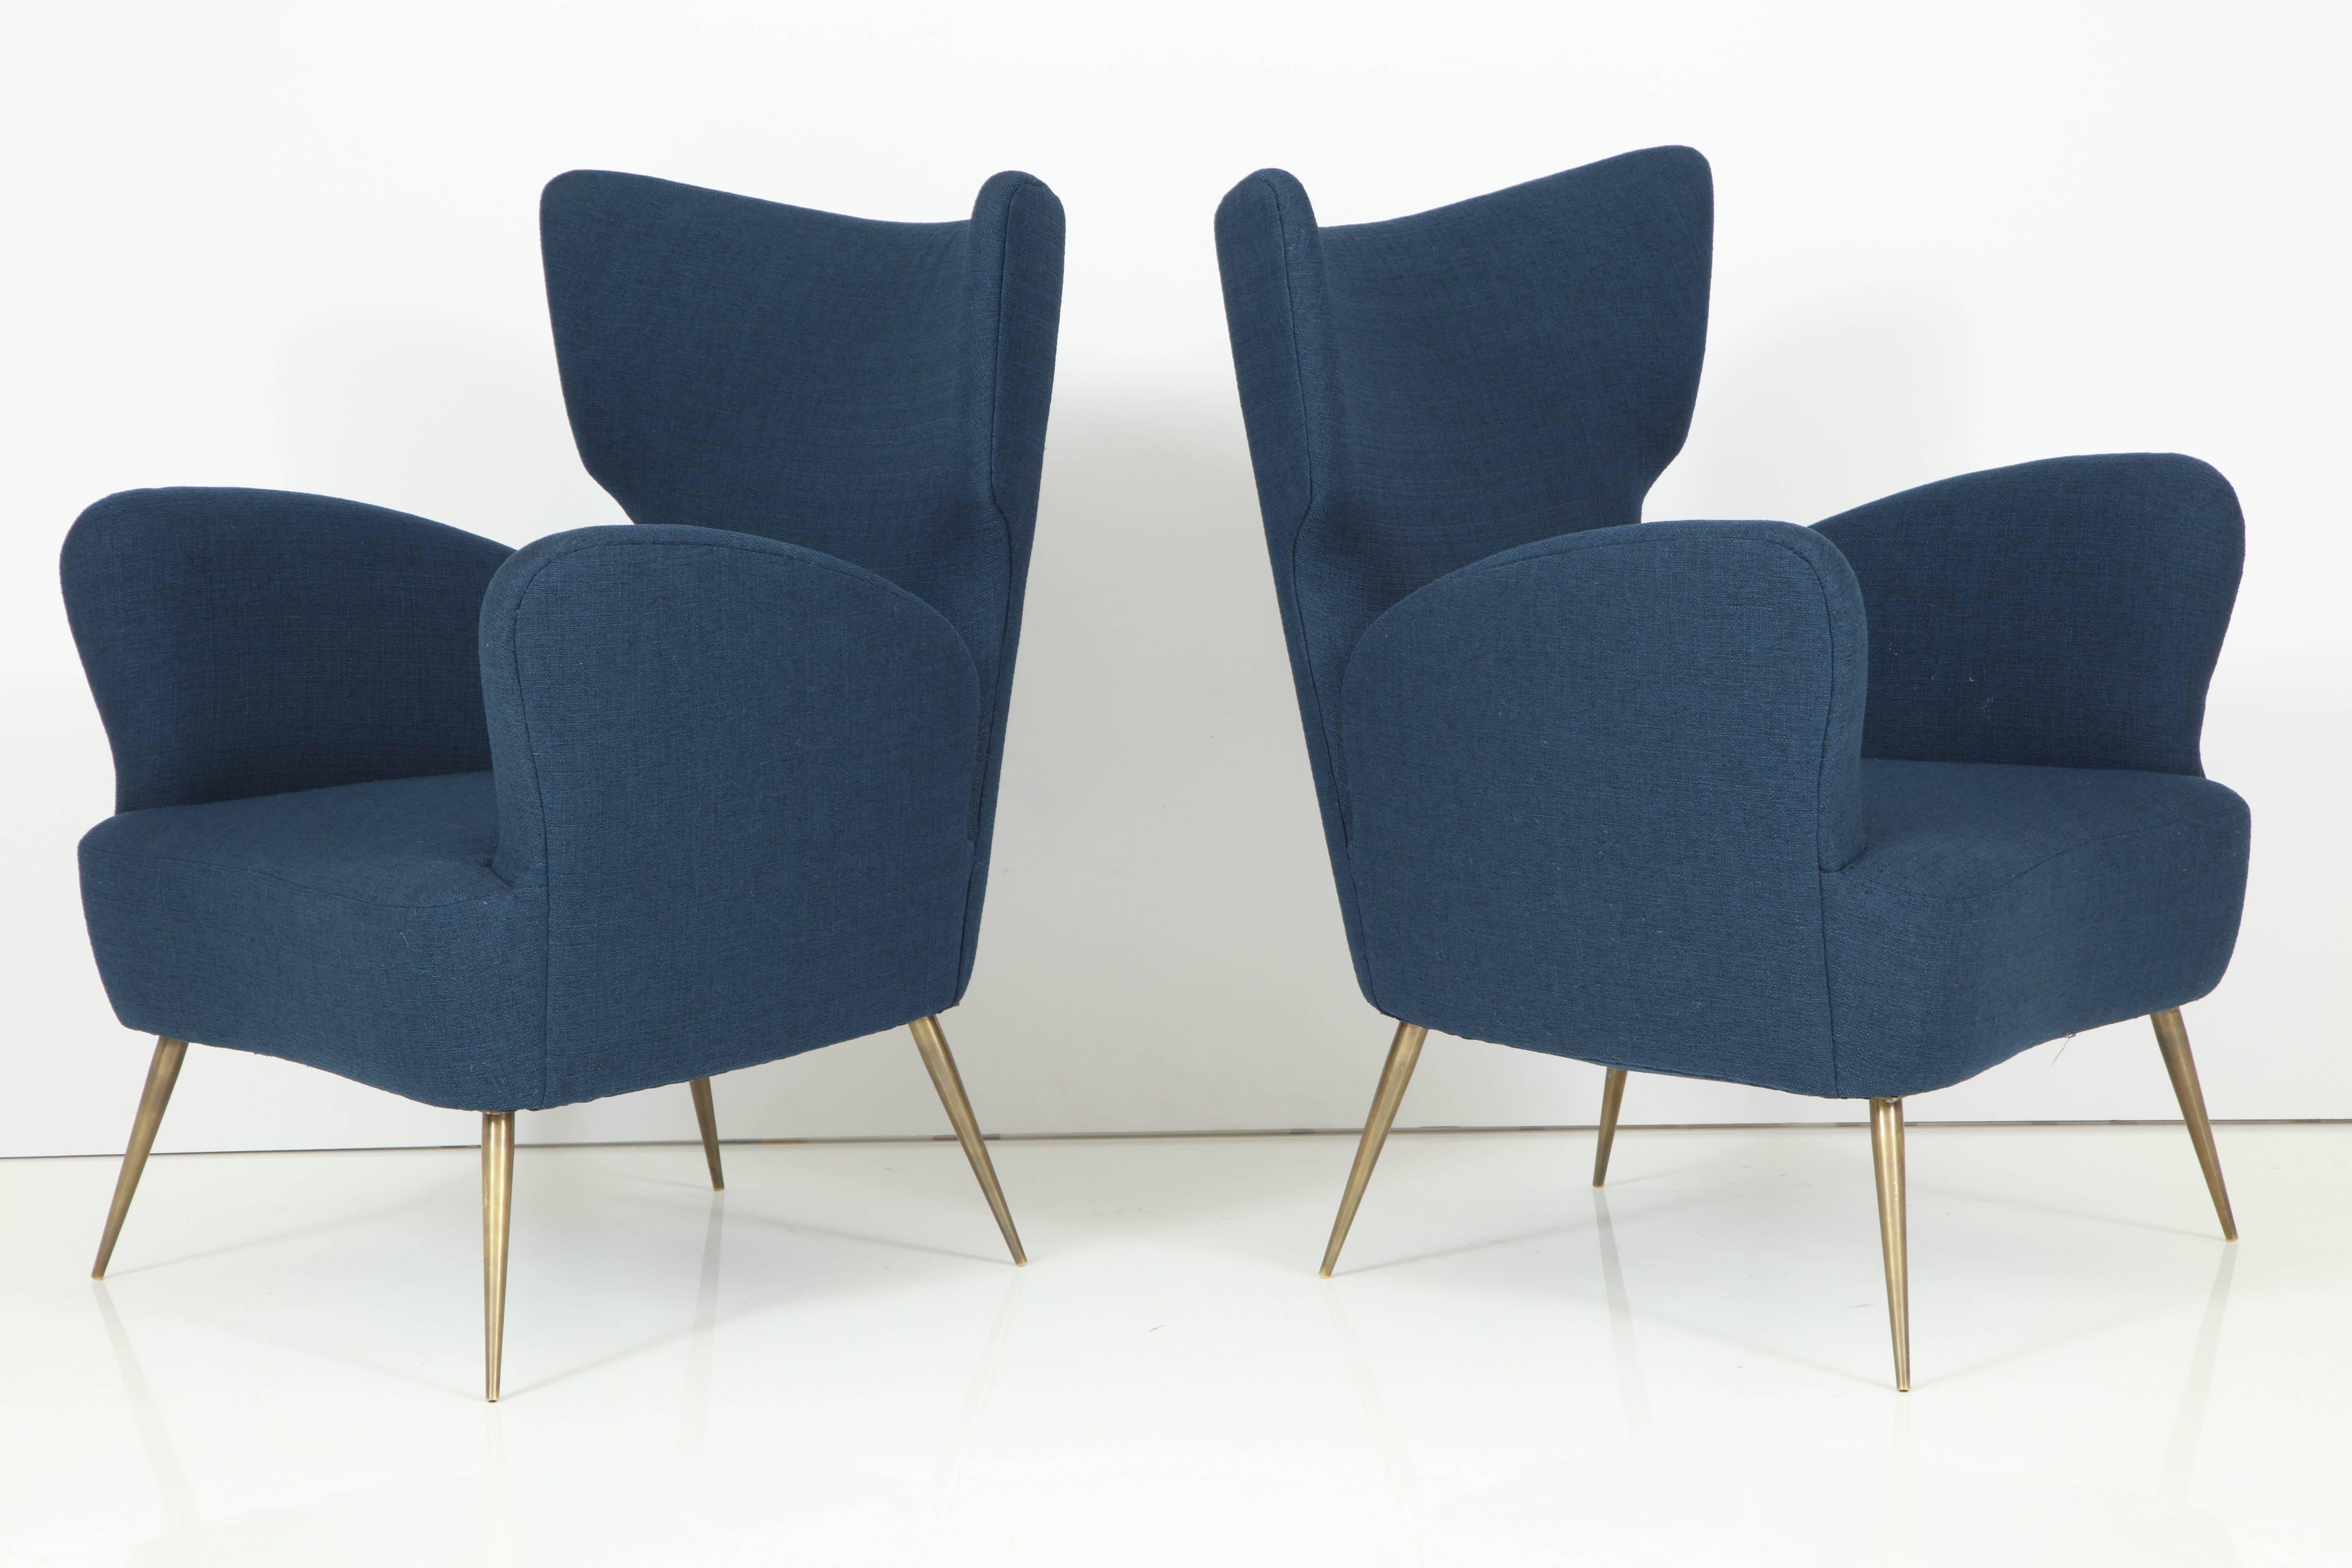 Pair of Italian wingchairs upholstered in blue cotton, on brass legs. Very comfortable.